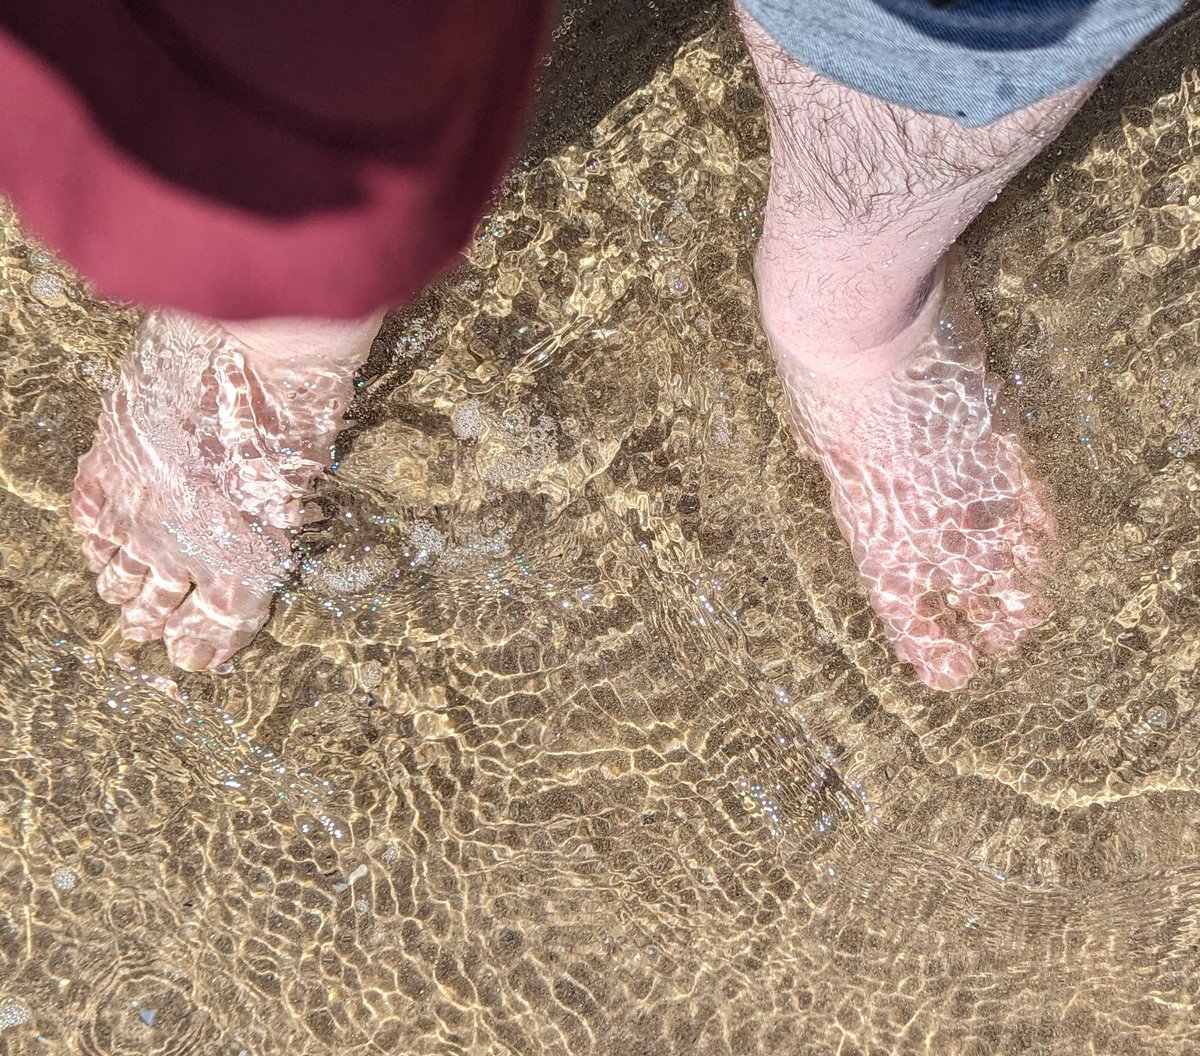 A little something for the onliest fans (my feet in the Mediterranean Sea) (likes on this post don't mean anything different I would never judge you)